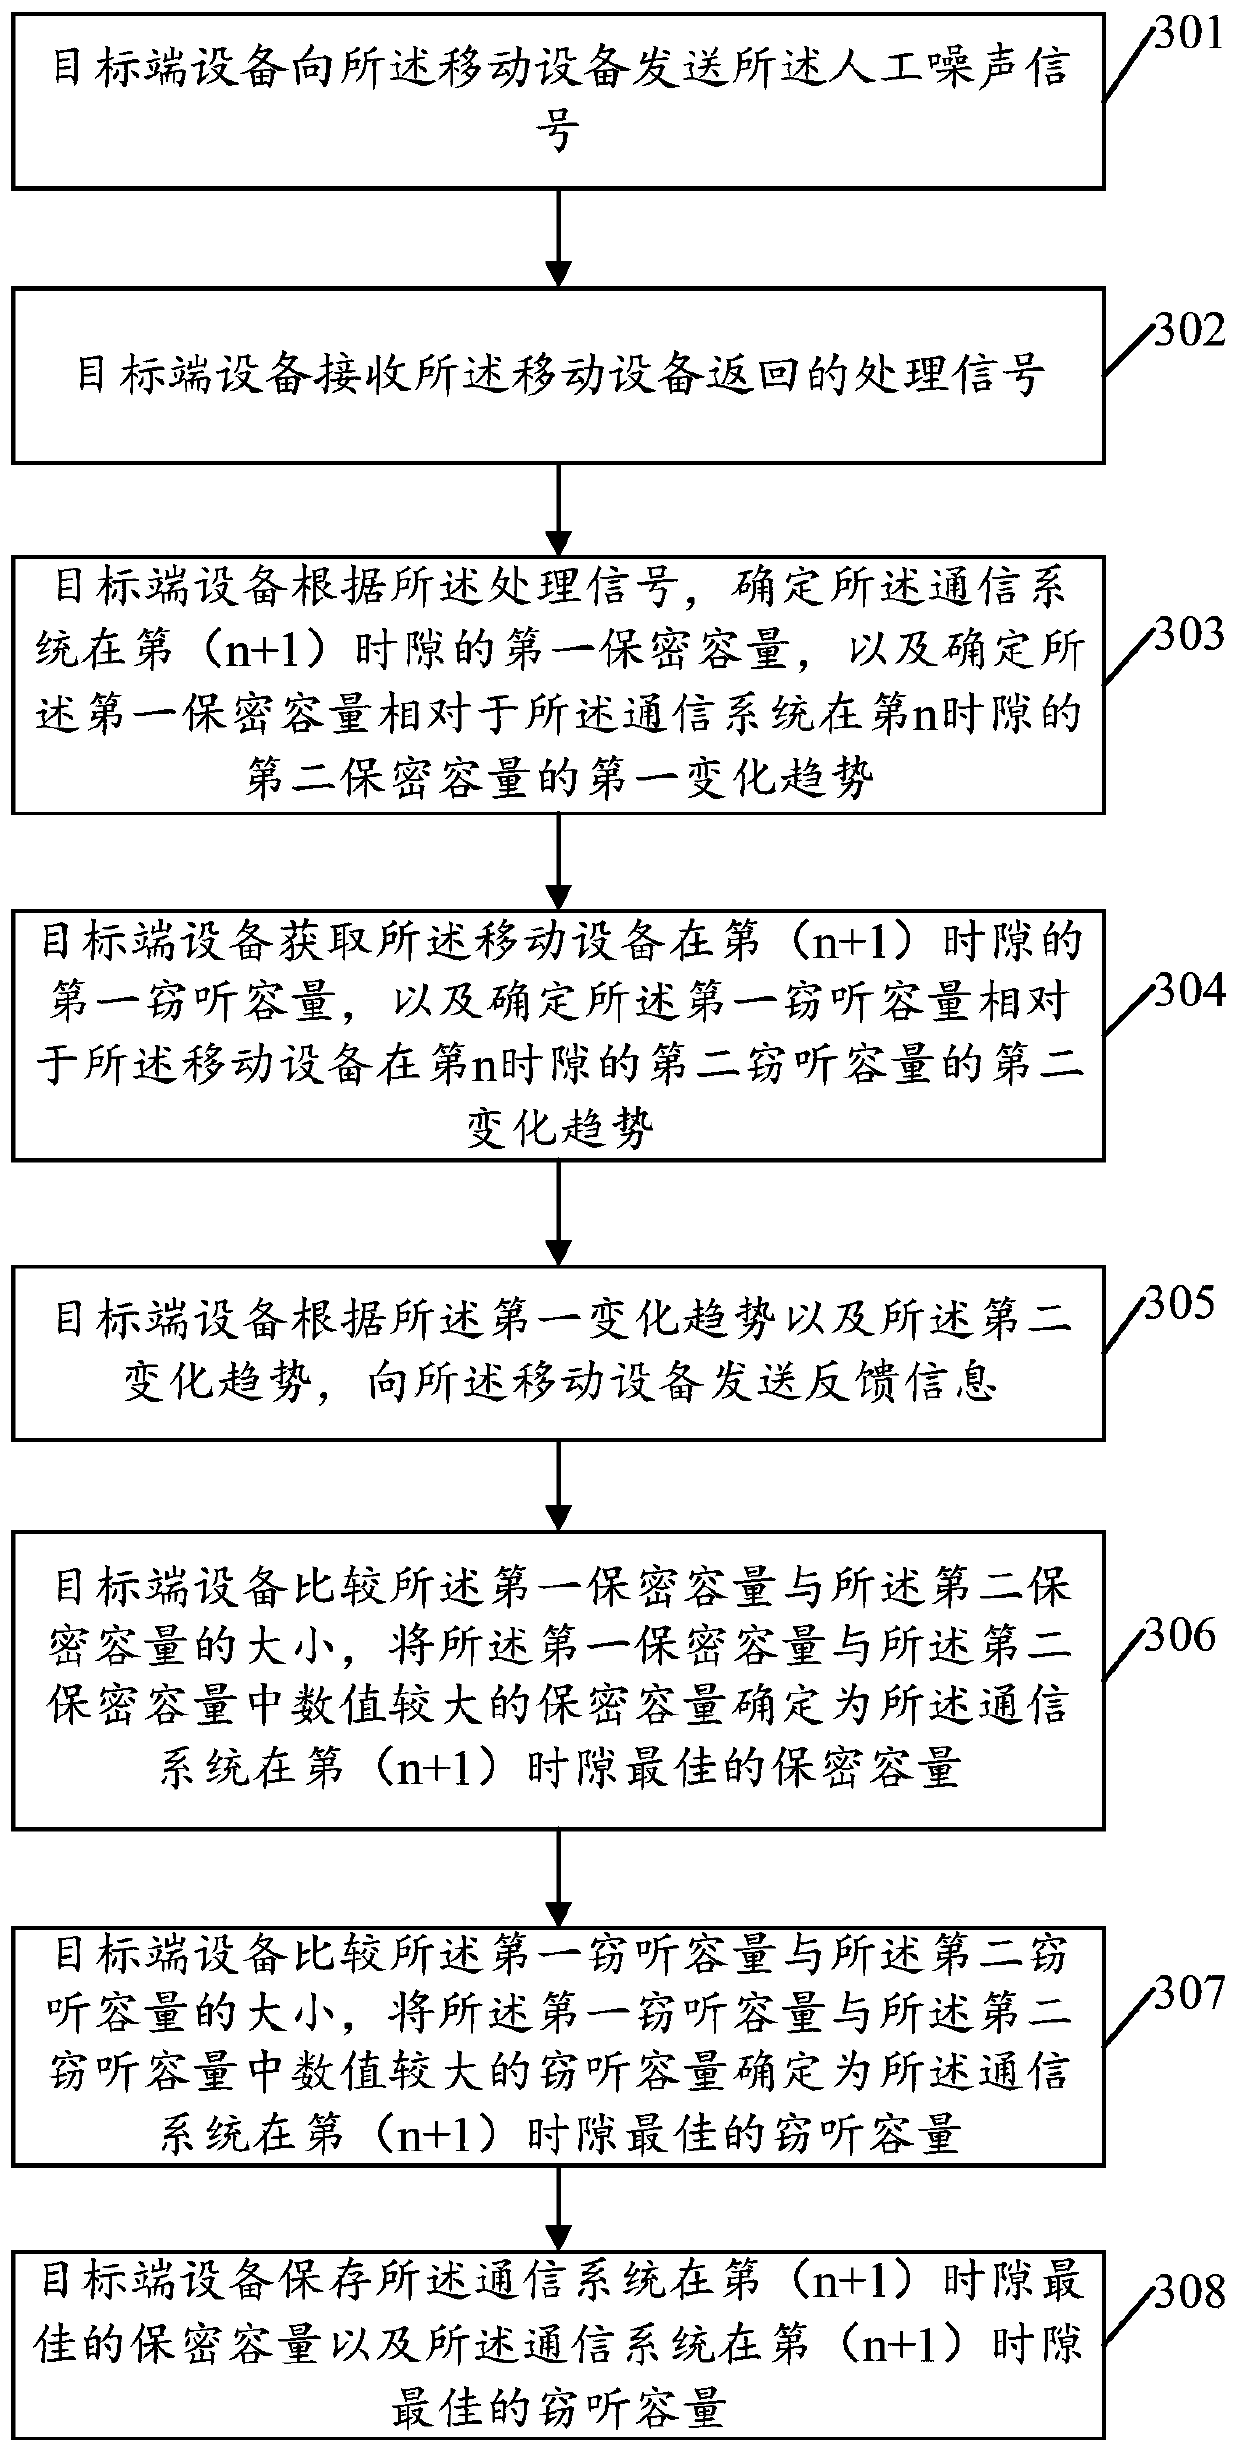 Method and device for position control of mobile equipment based on single-bit feedback